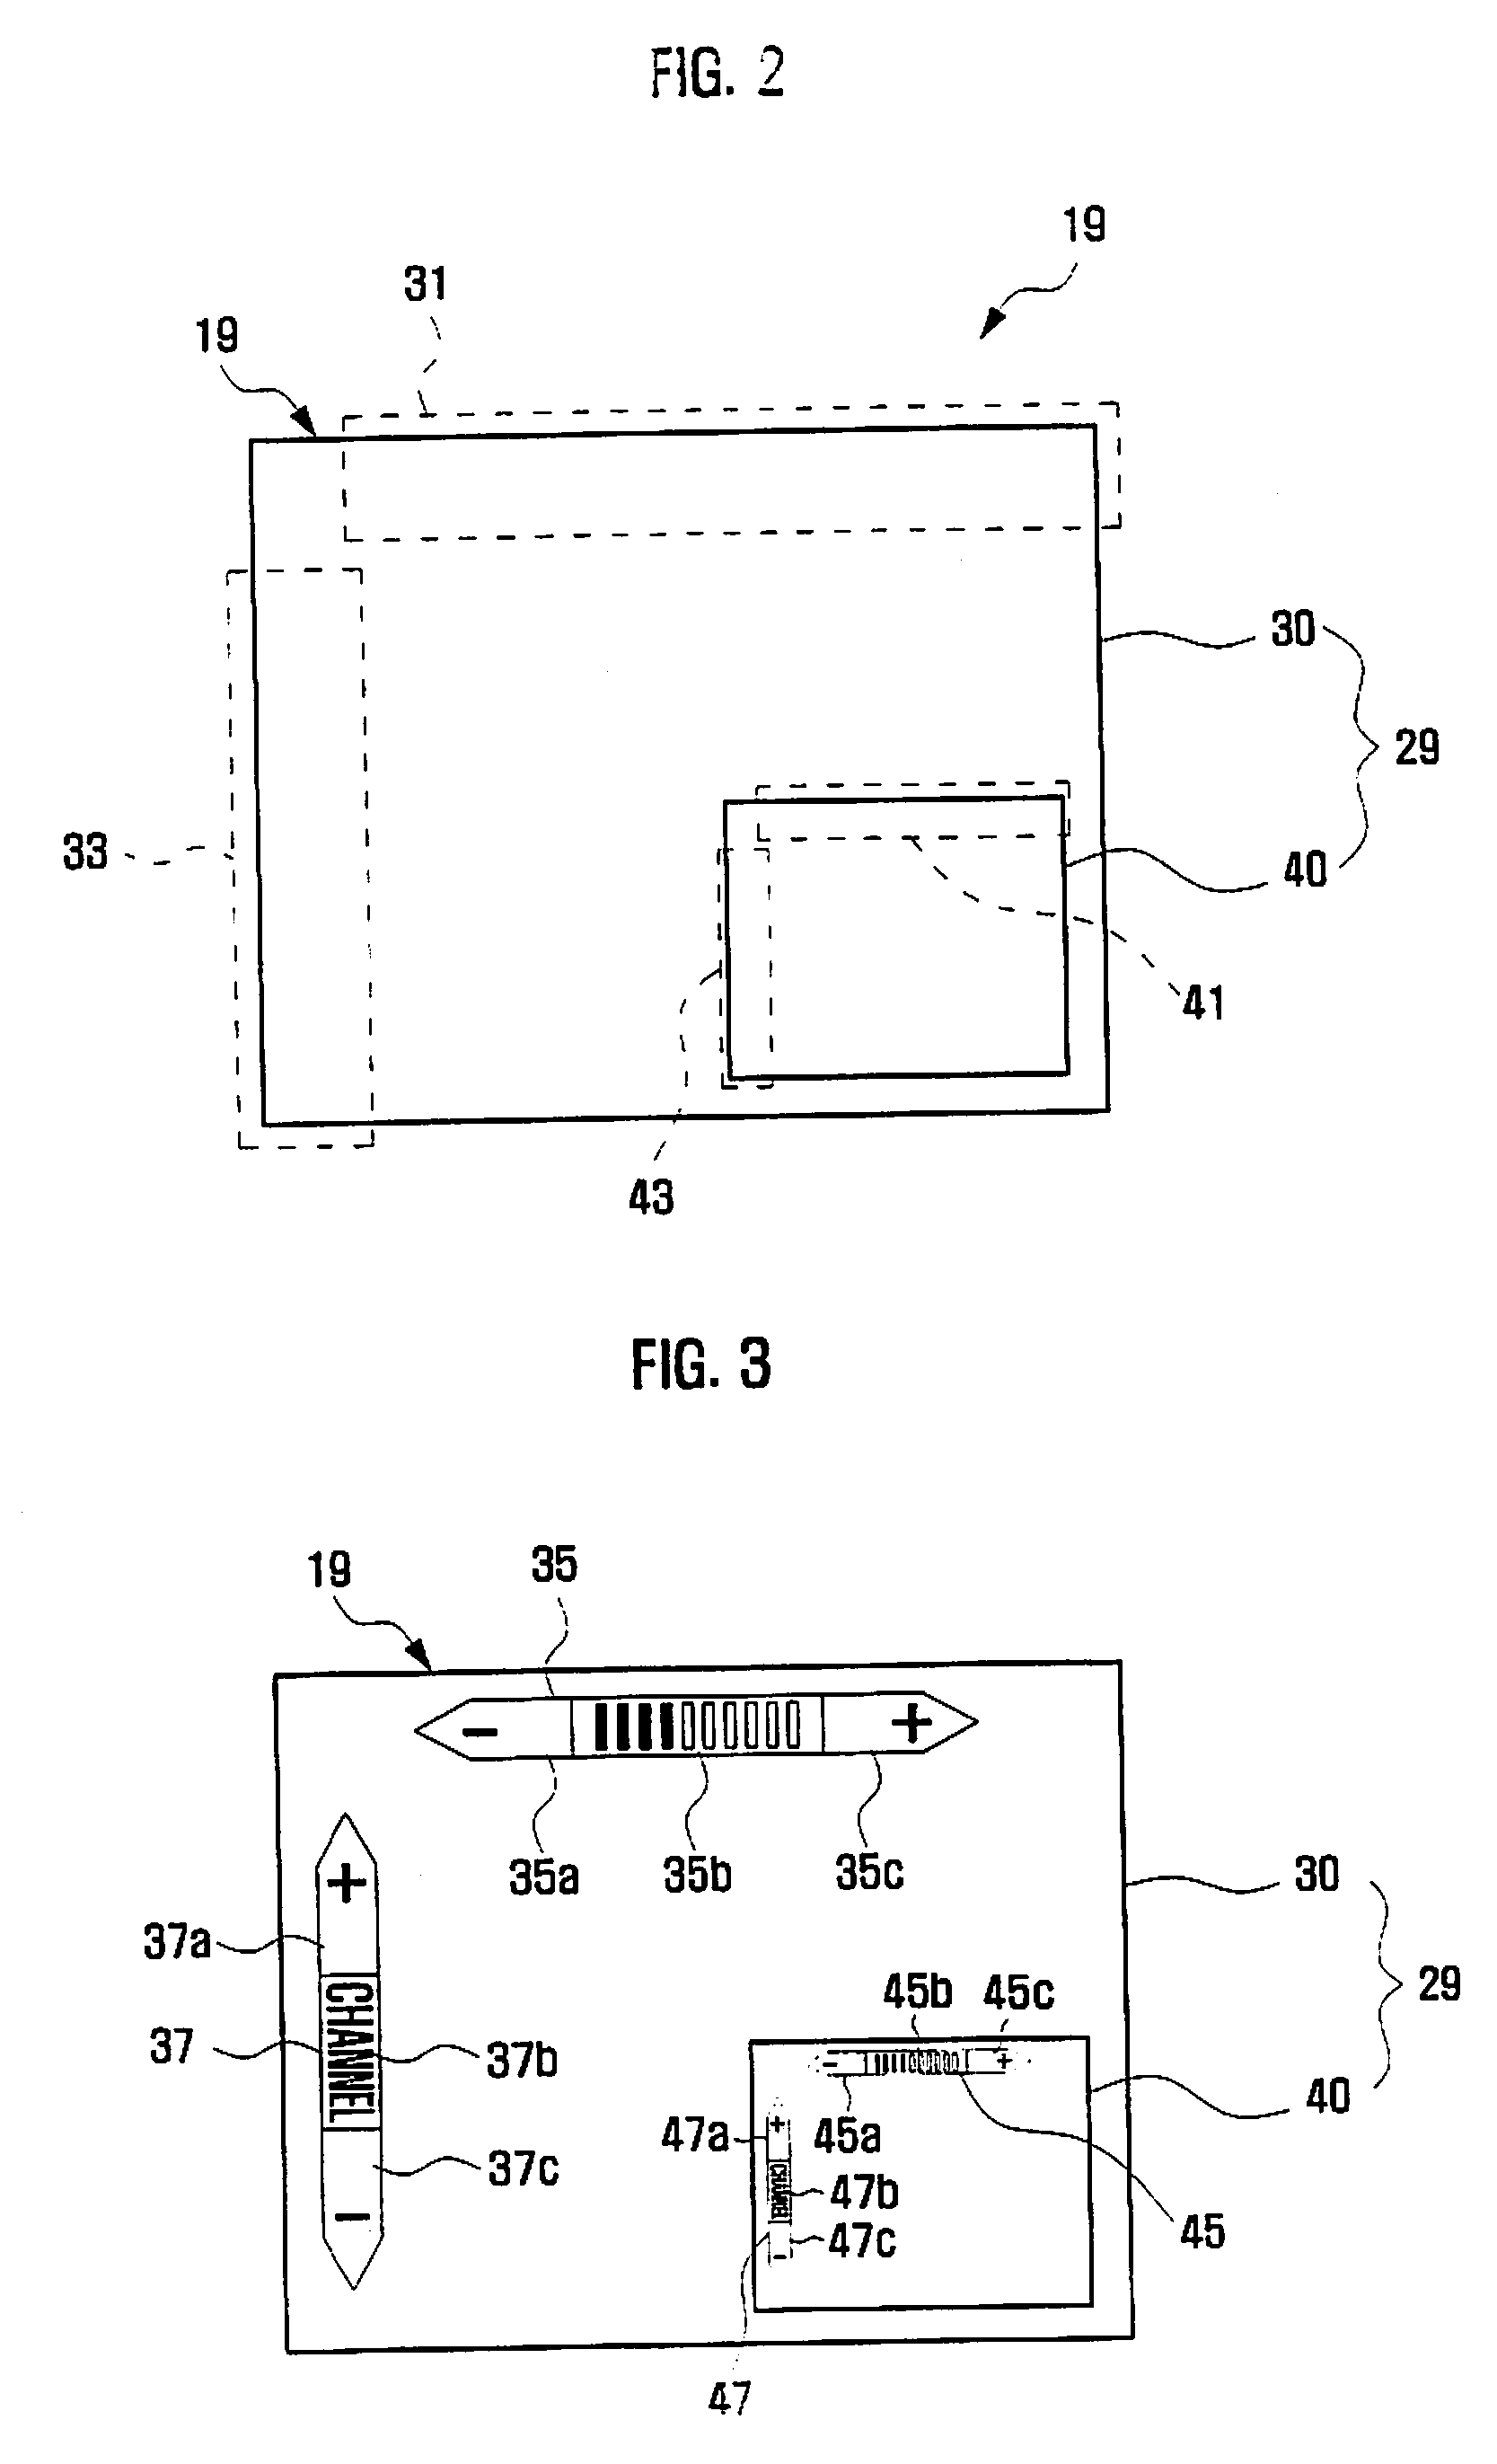 Mobile terminal having digital broadcast reception capability and pip display control method